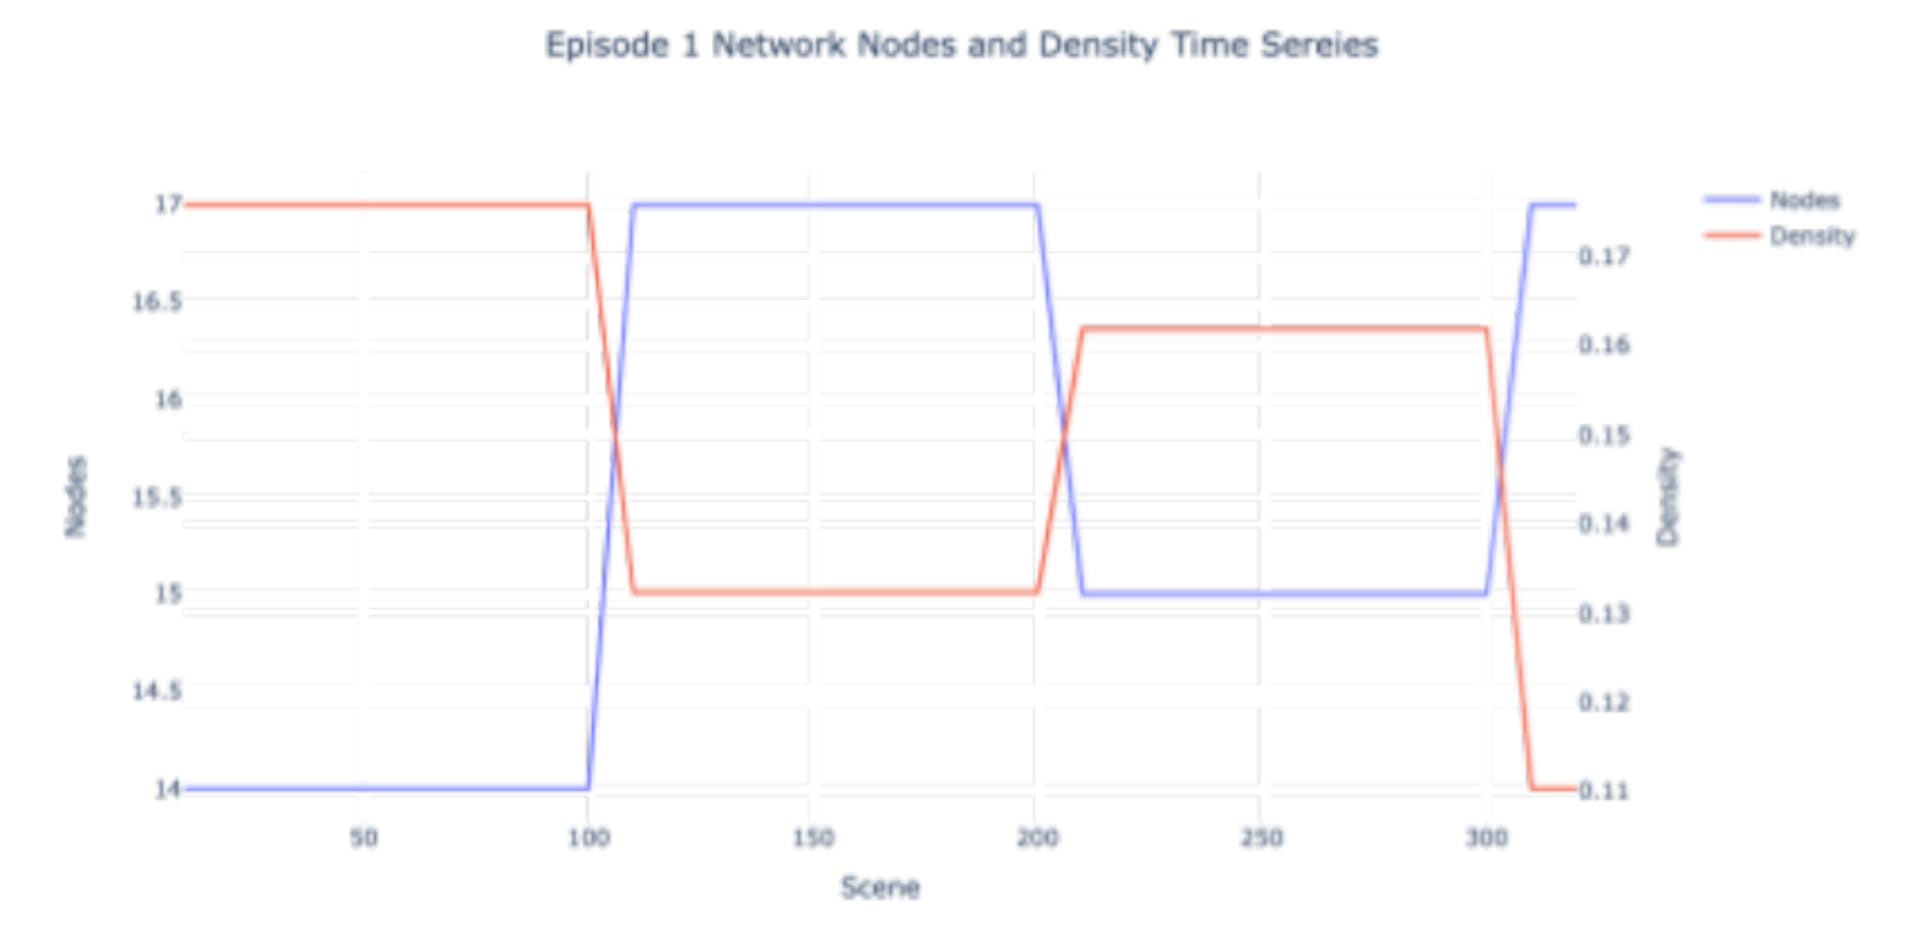 Fig. 4. Time series for the number of active nodes and network density from Game of Thrones Episode 1.